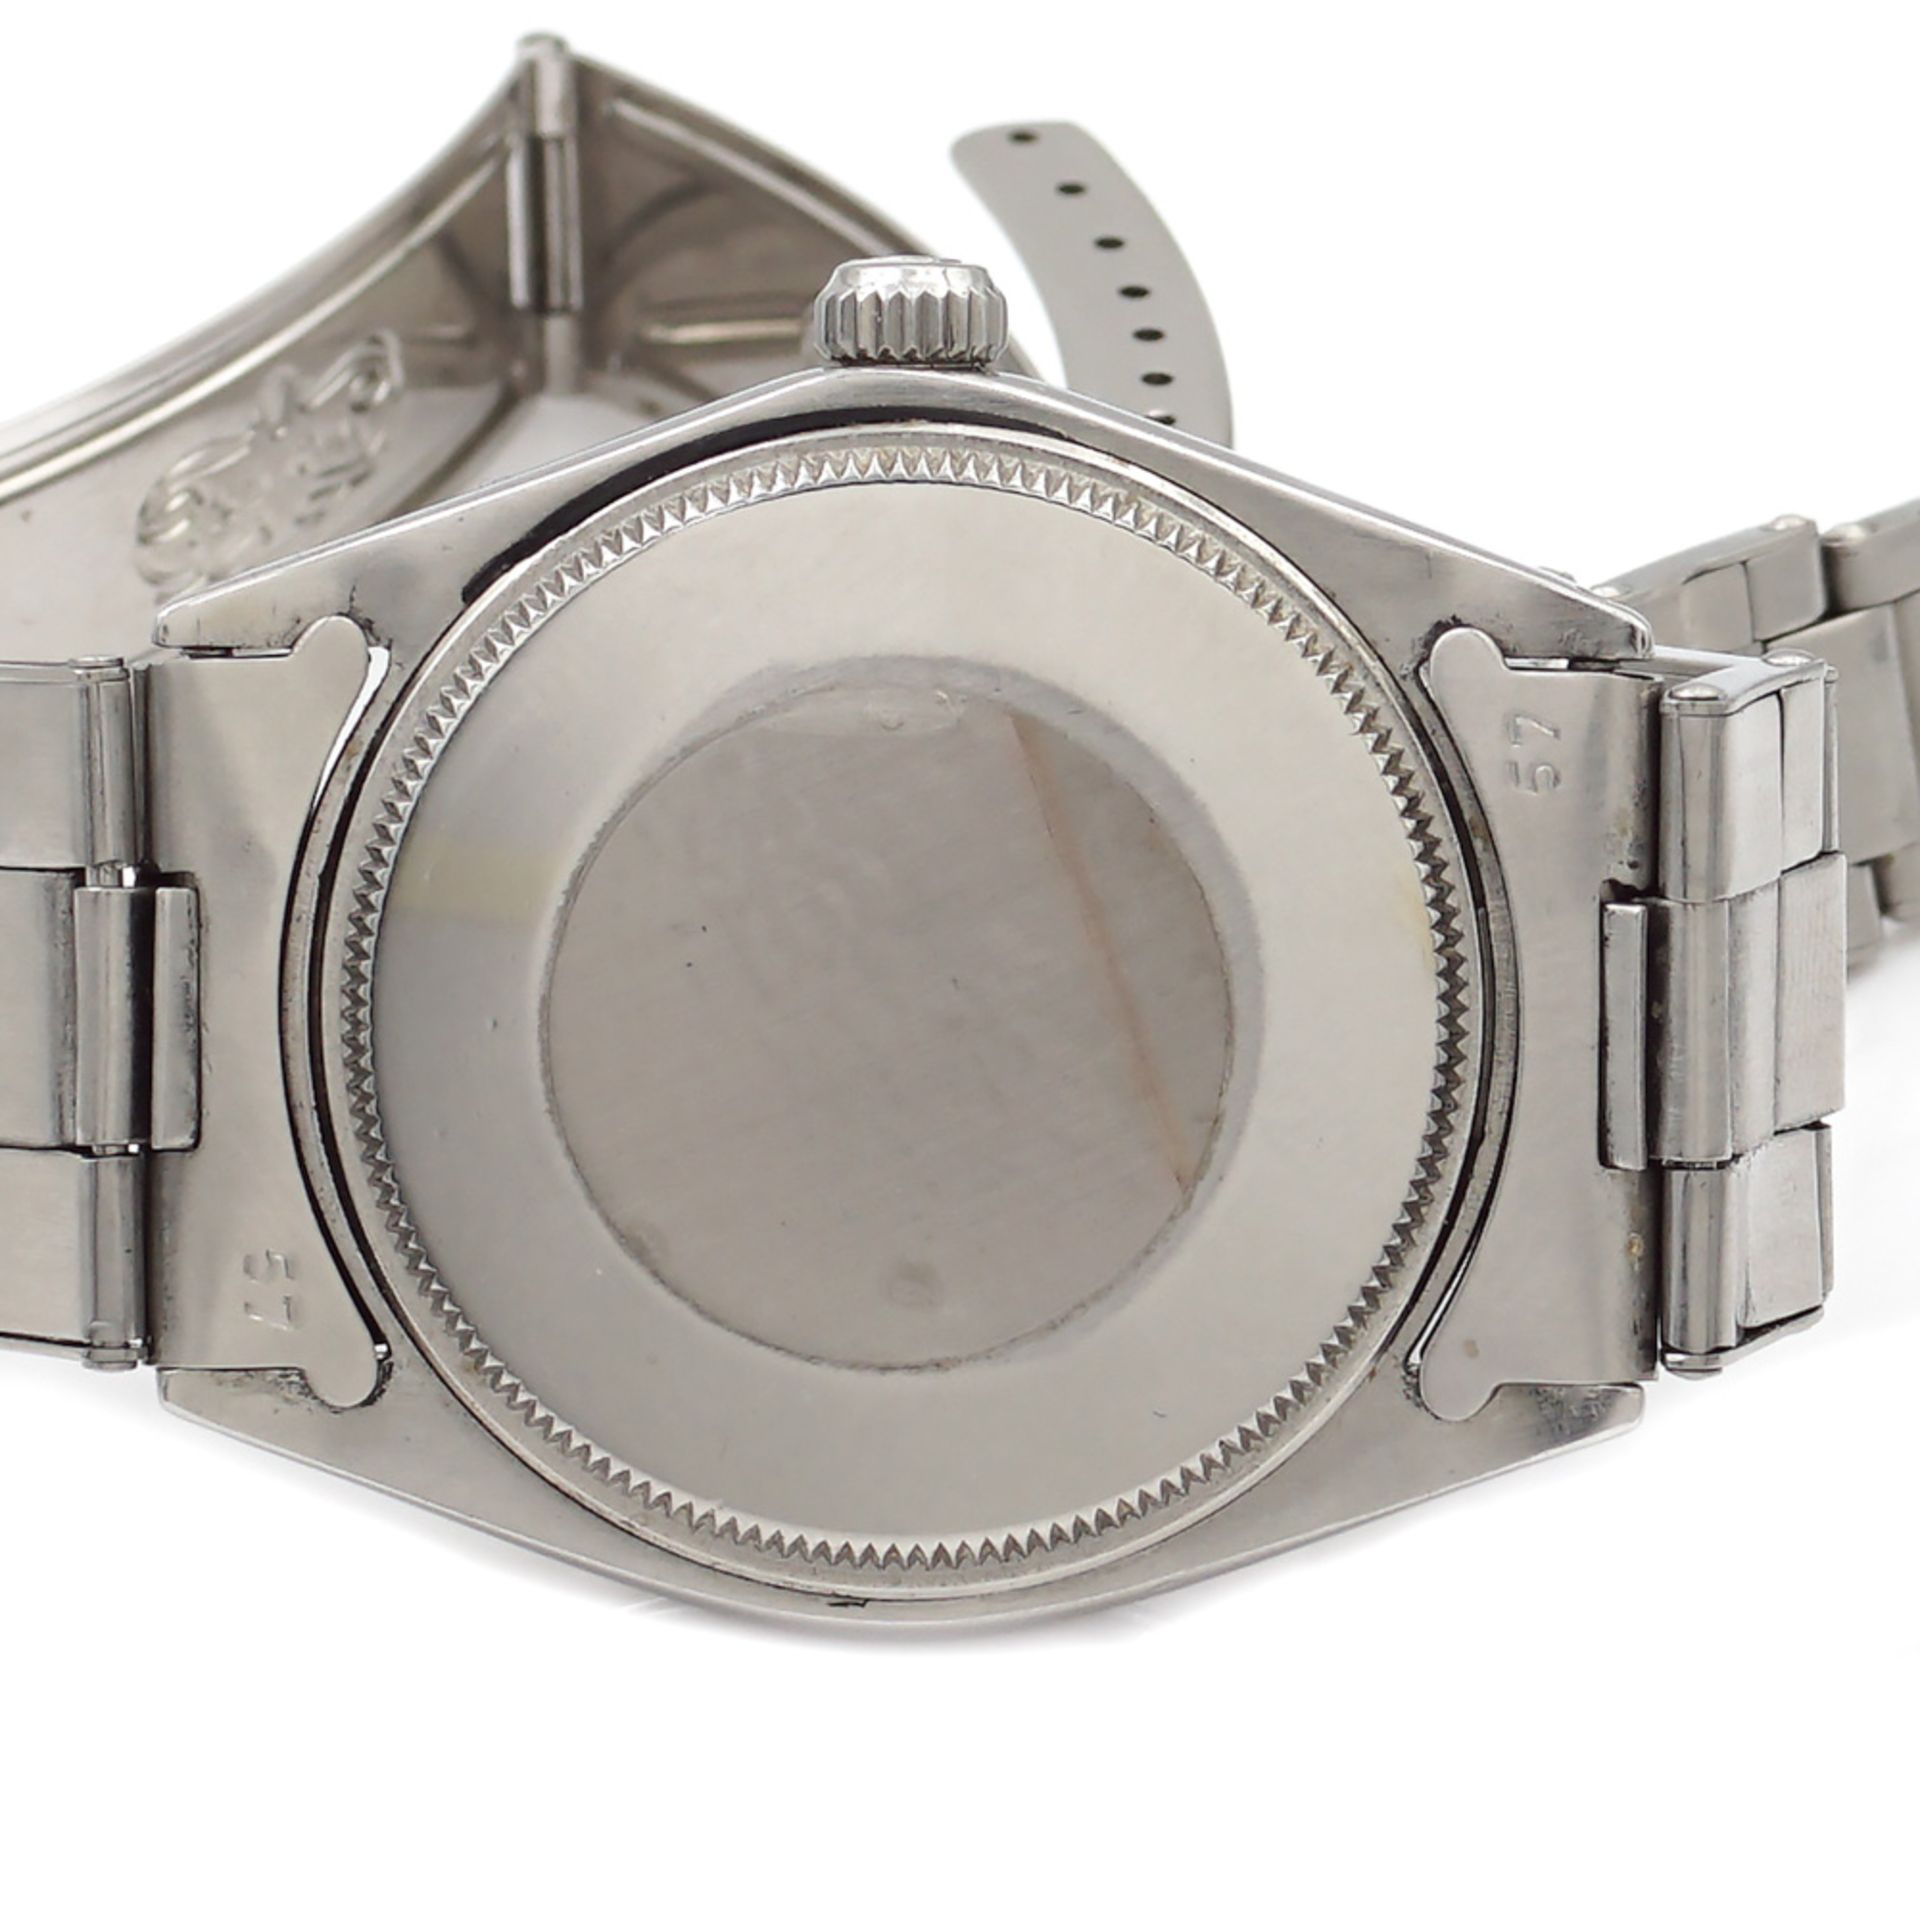 Rolex Oyster Perpetual Air King, vintage wrist watch 1960/70s - Image 3 of 4